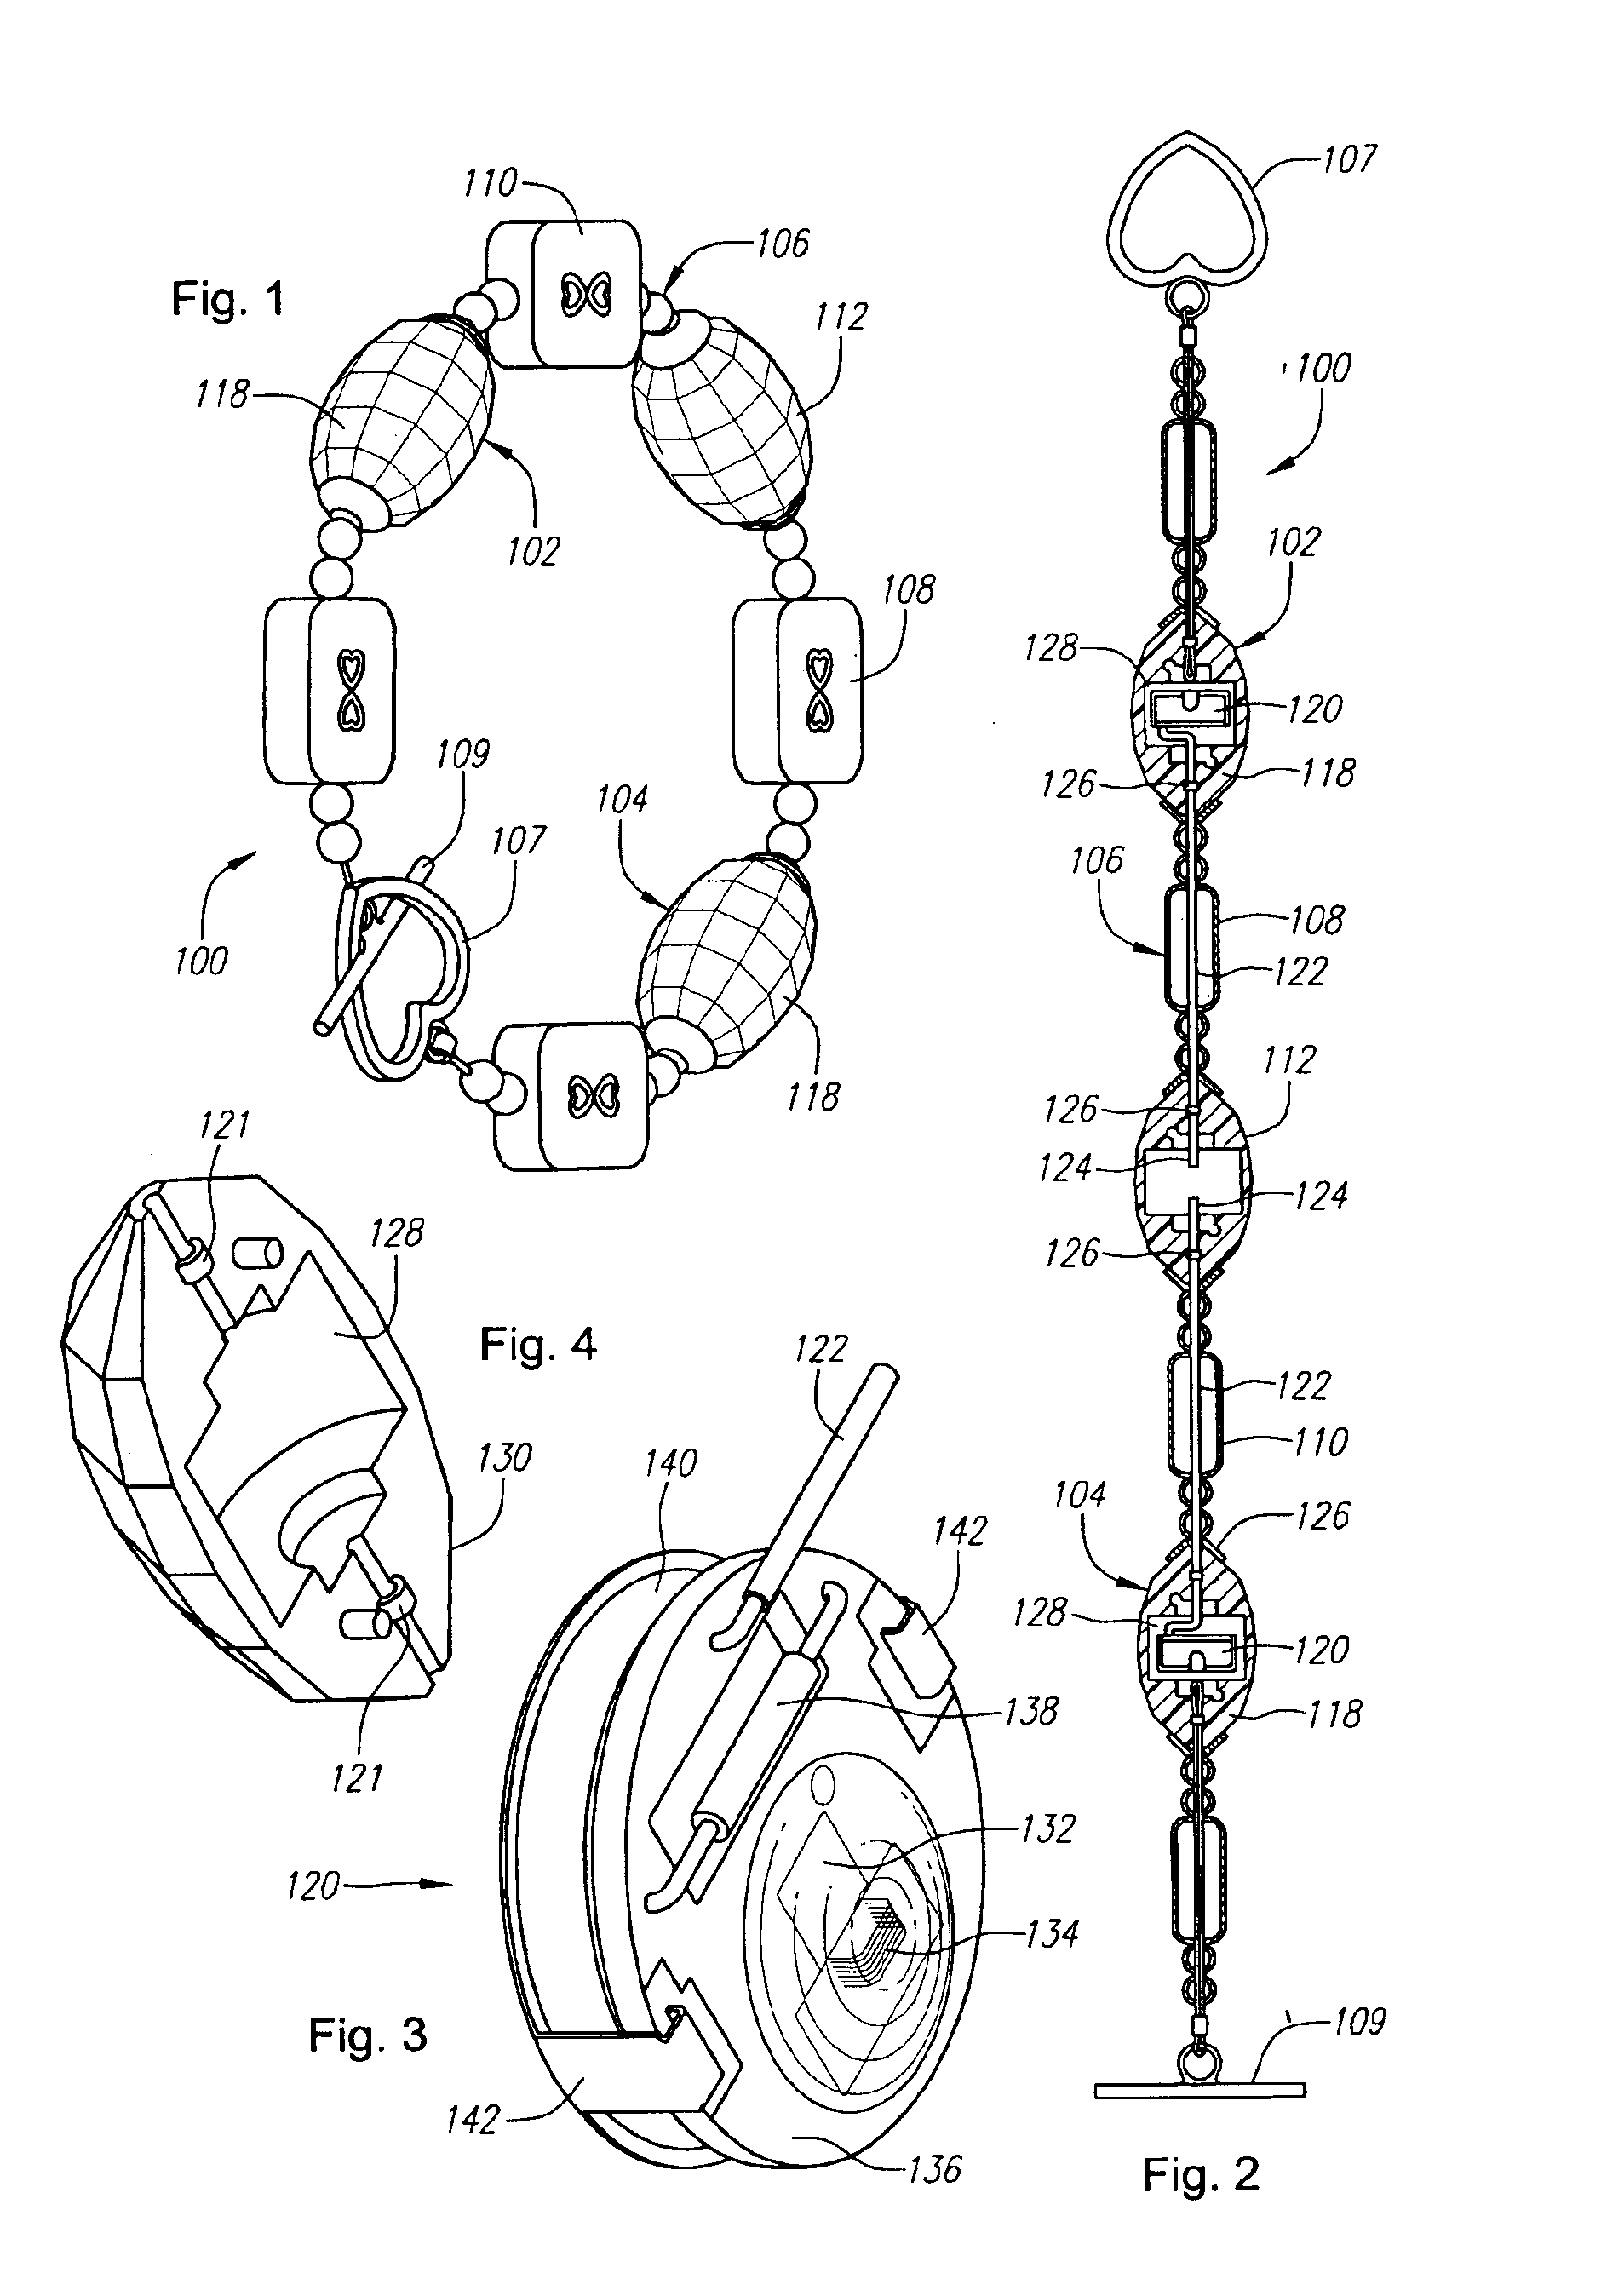 Fashion accessory with wireless signal alerting device